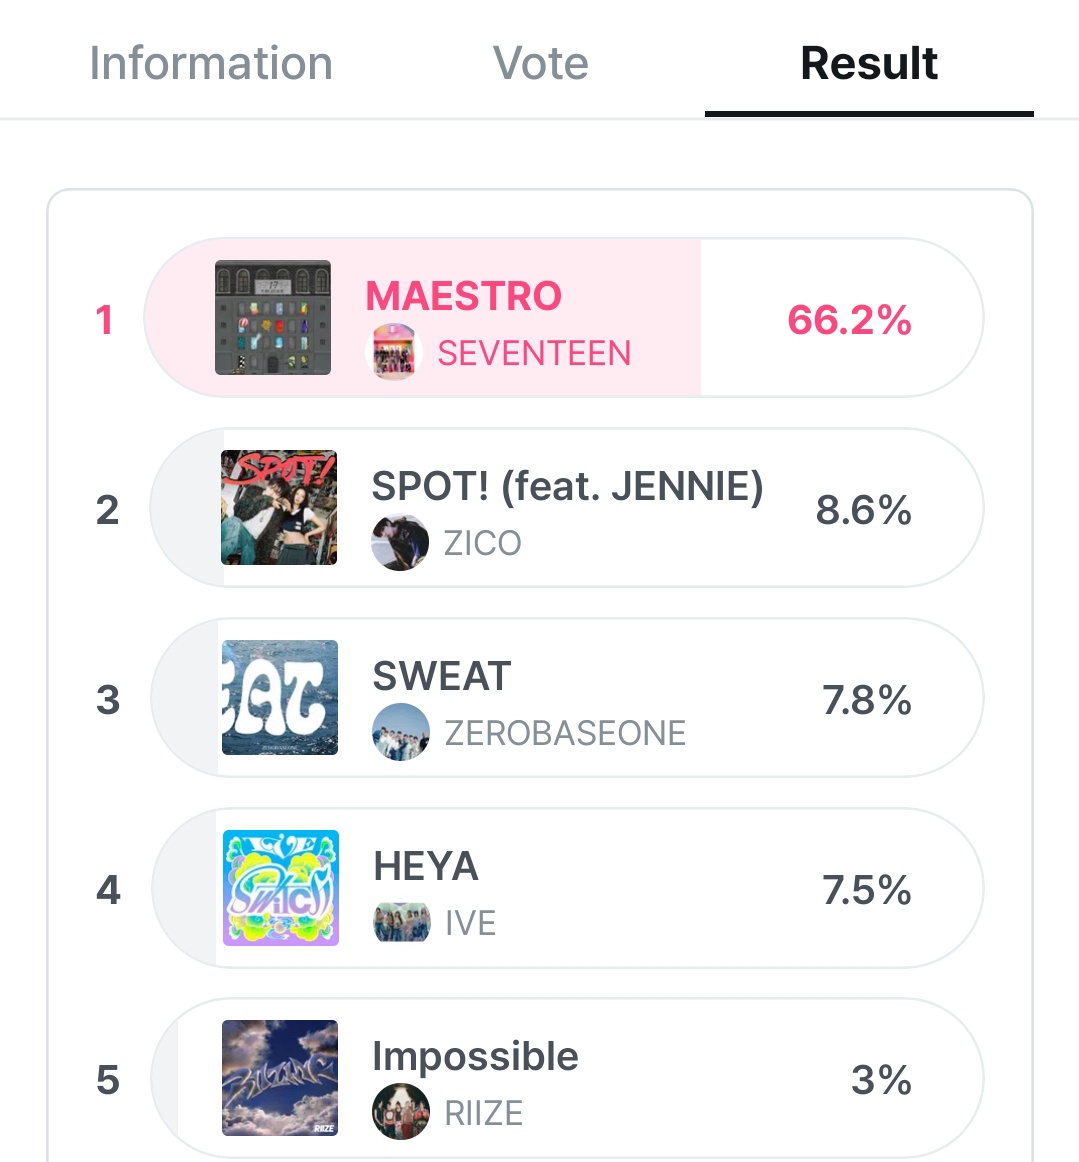 EYES HERE CARATS, DROP YOUR VOTES IN MNET+ WE NEED EVERYONE HERE. 

1 VOTE PER DEVICE!!!!